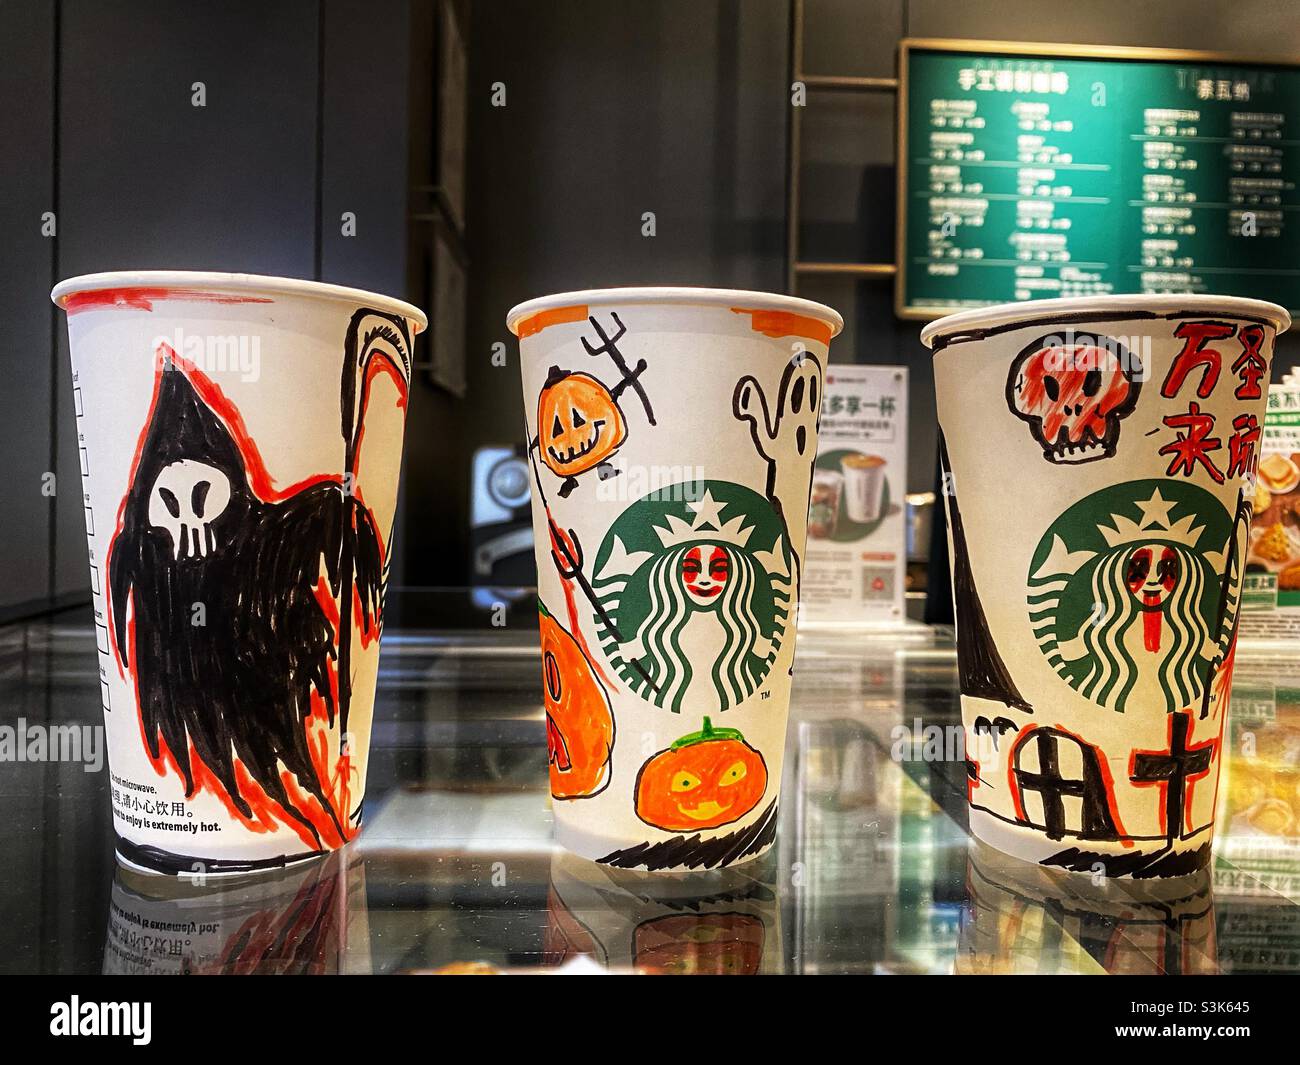 Halloween drawings on a paper cups in Starbucks. Stock Photo